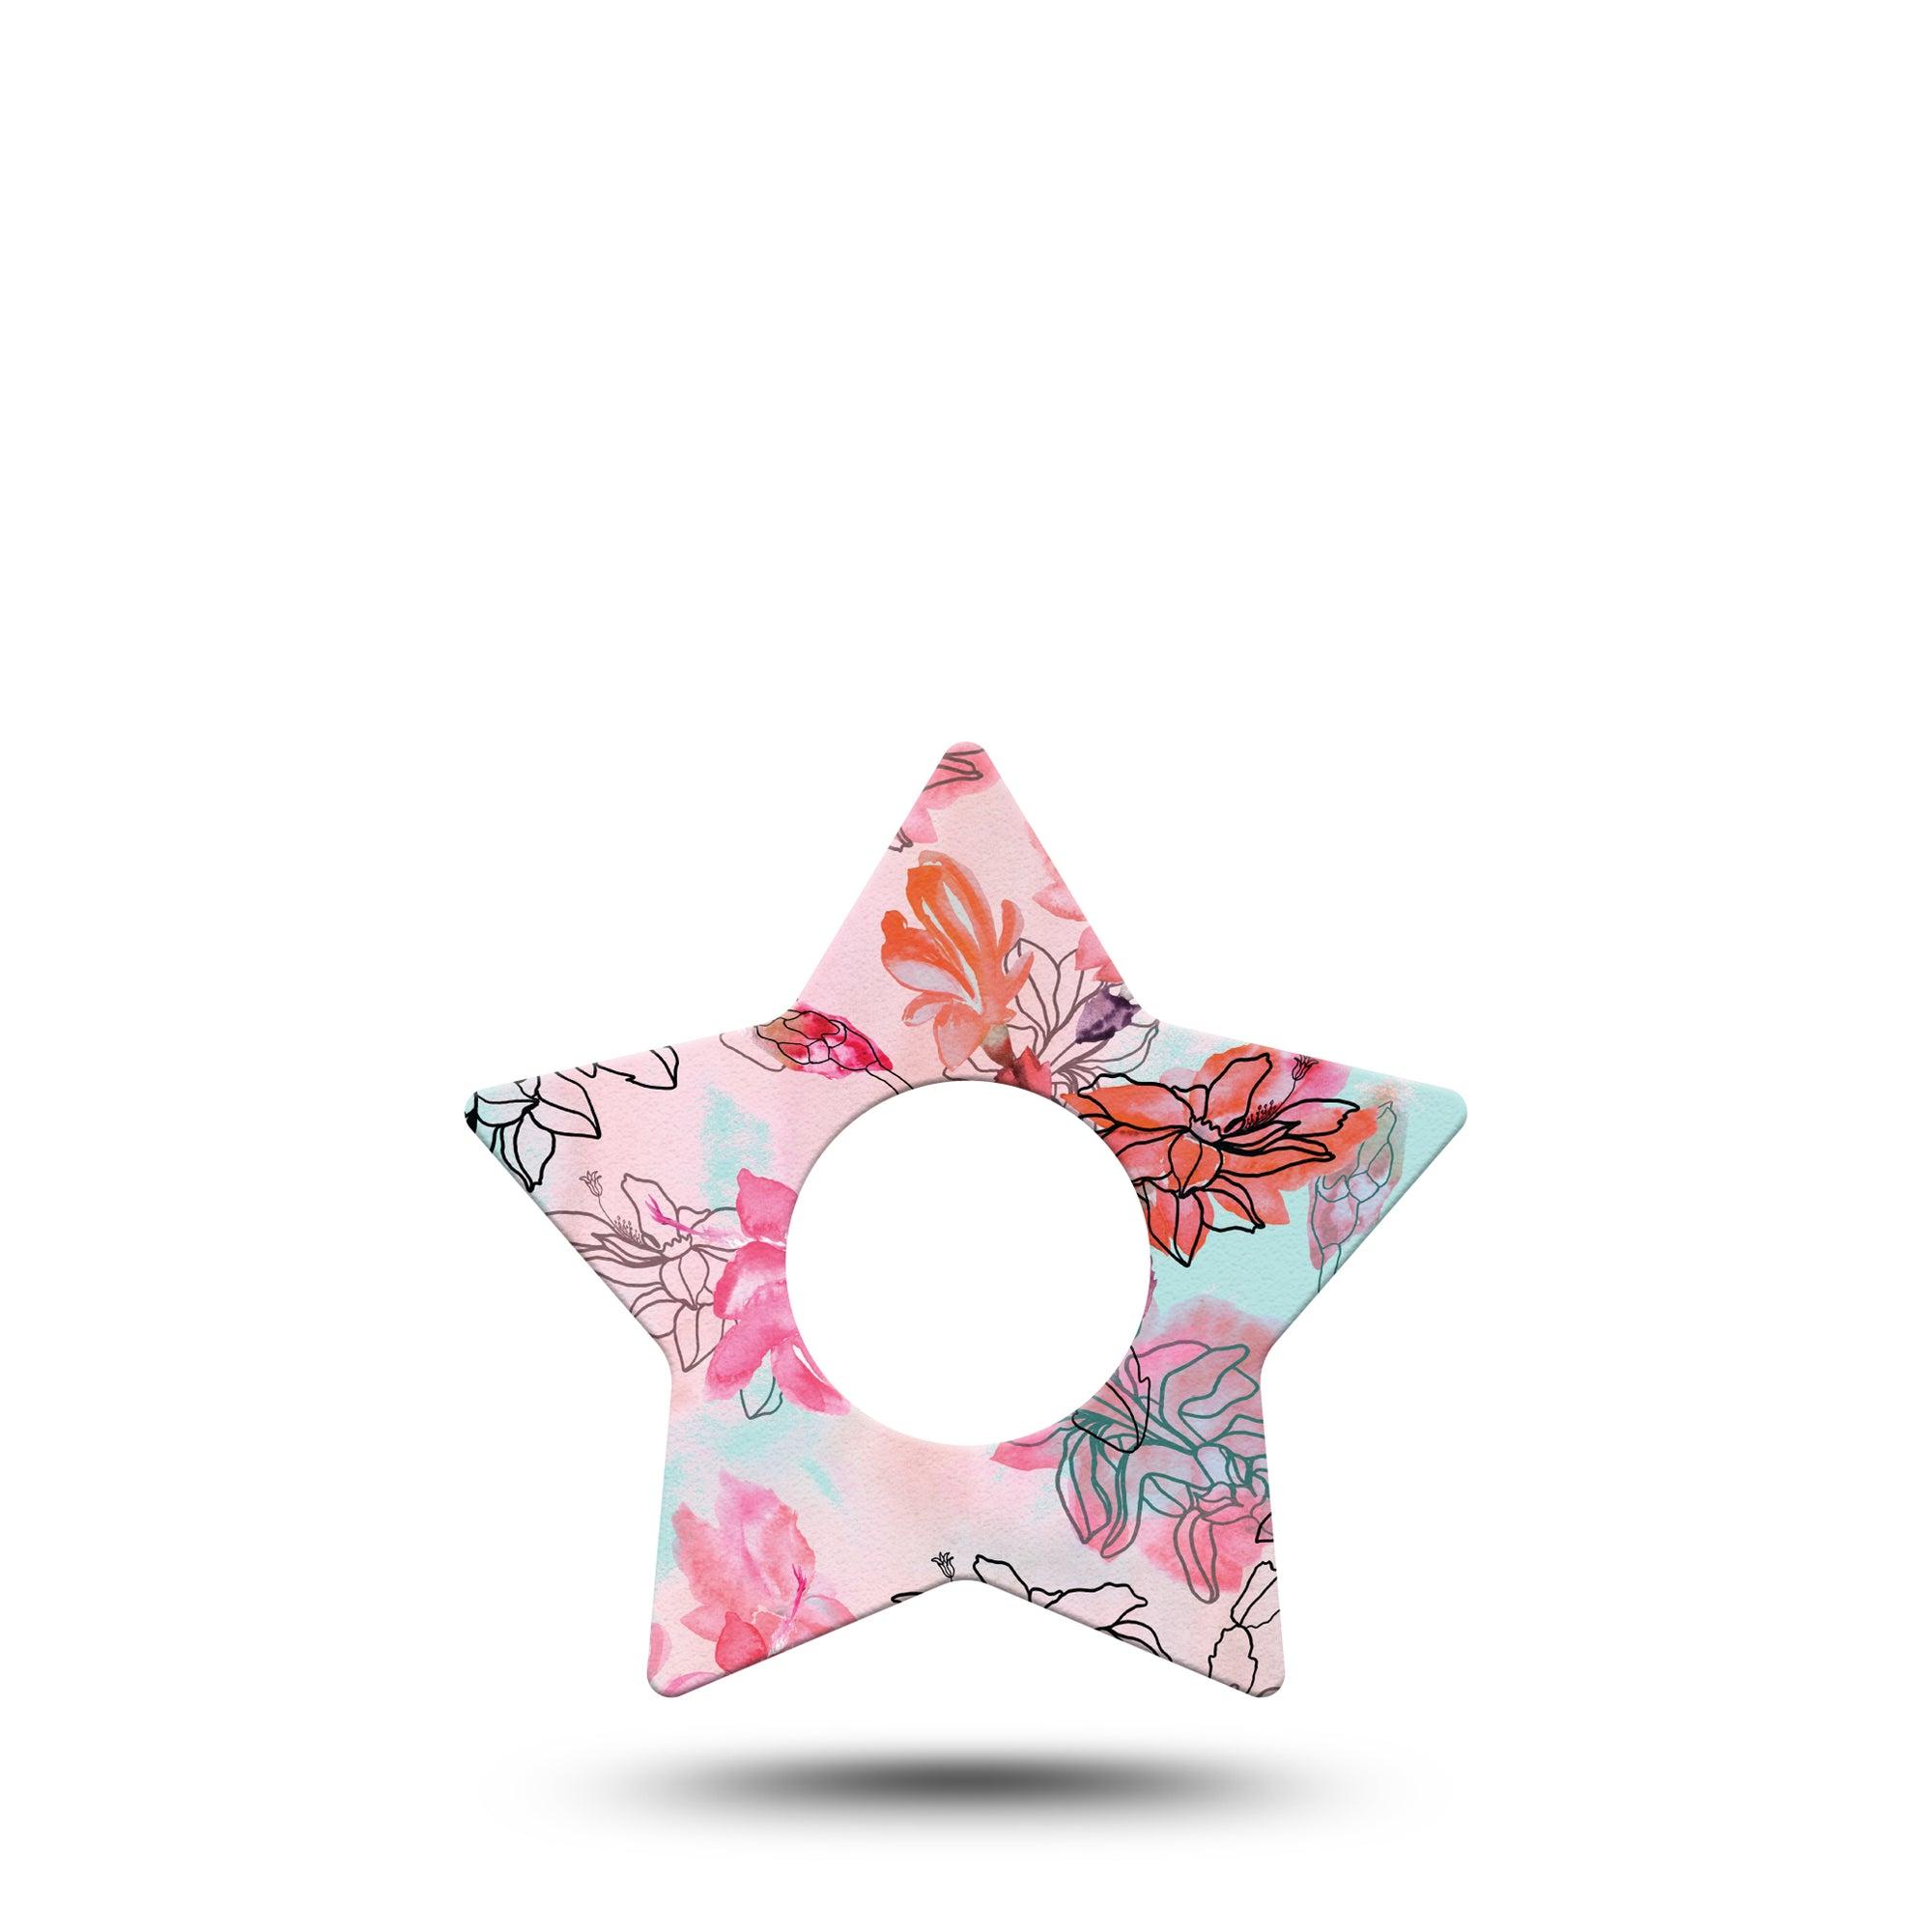 ExpressionMed Whimsical Blossoms Star Infusion Set Tape, 5-Pack, Pink Florals Themed, Plaster Patch Design